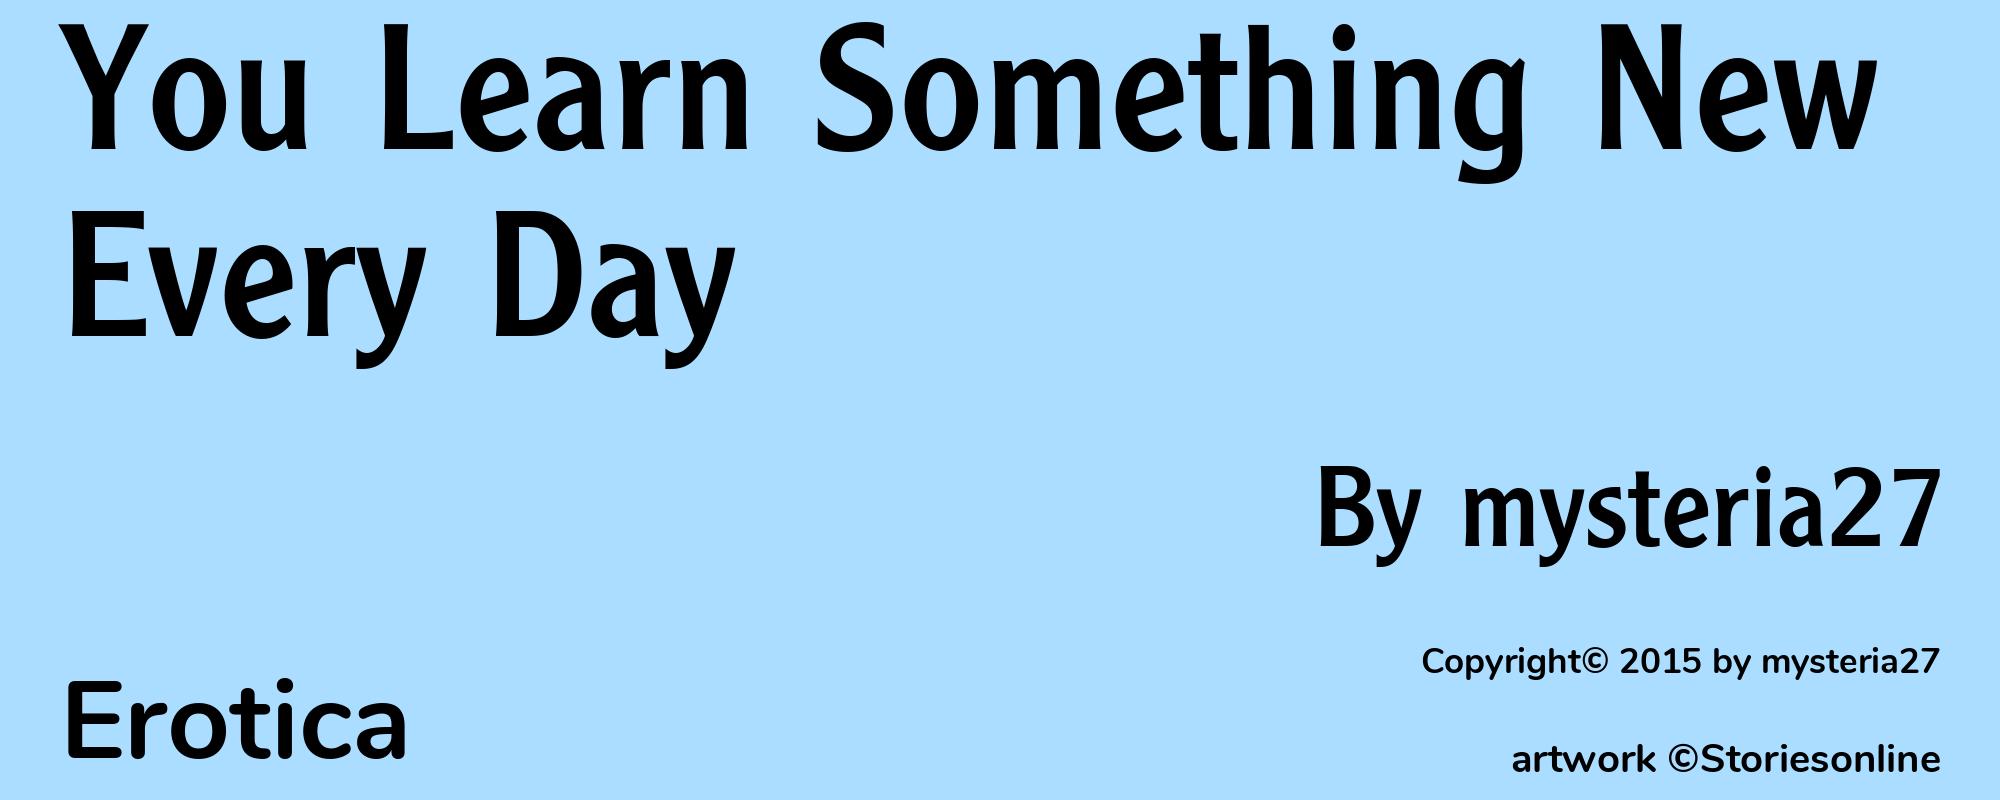 You Learn Something New Every Day - Cover